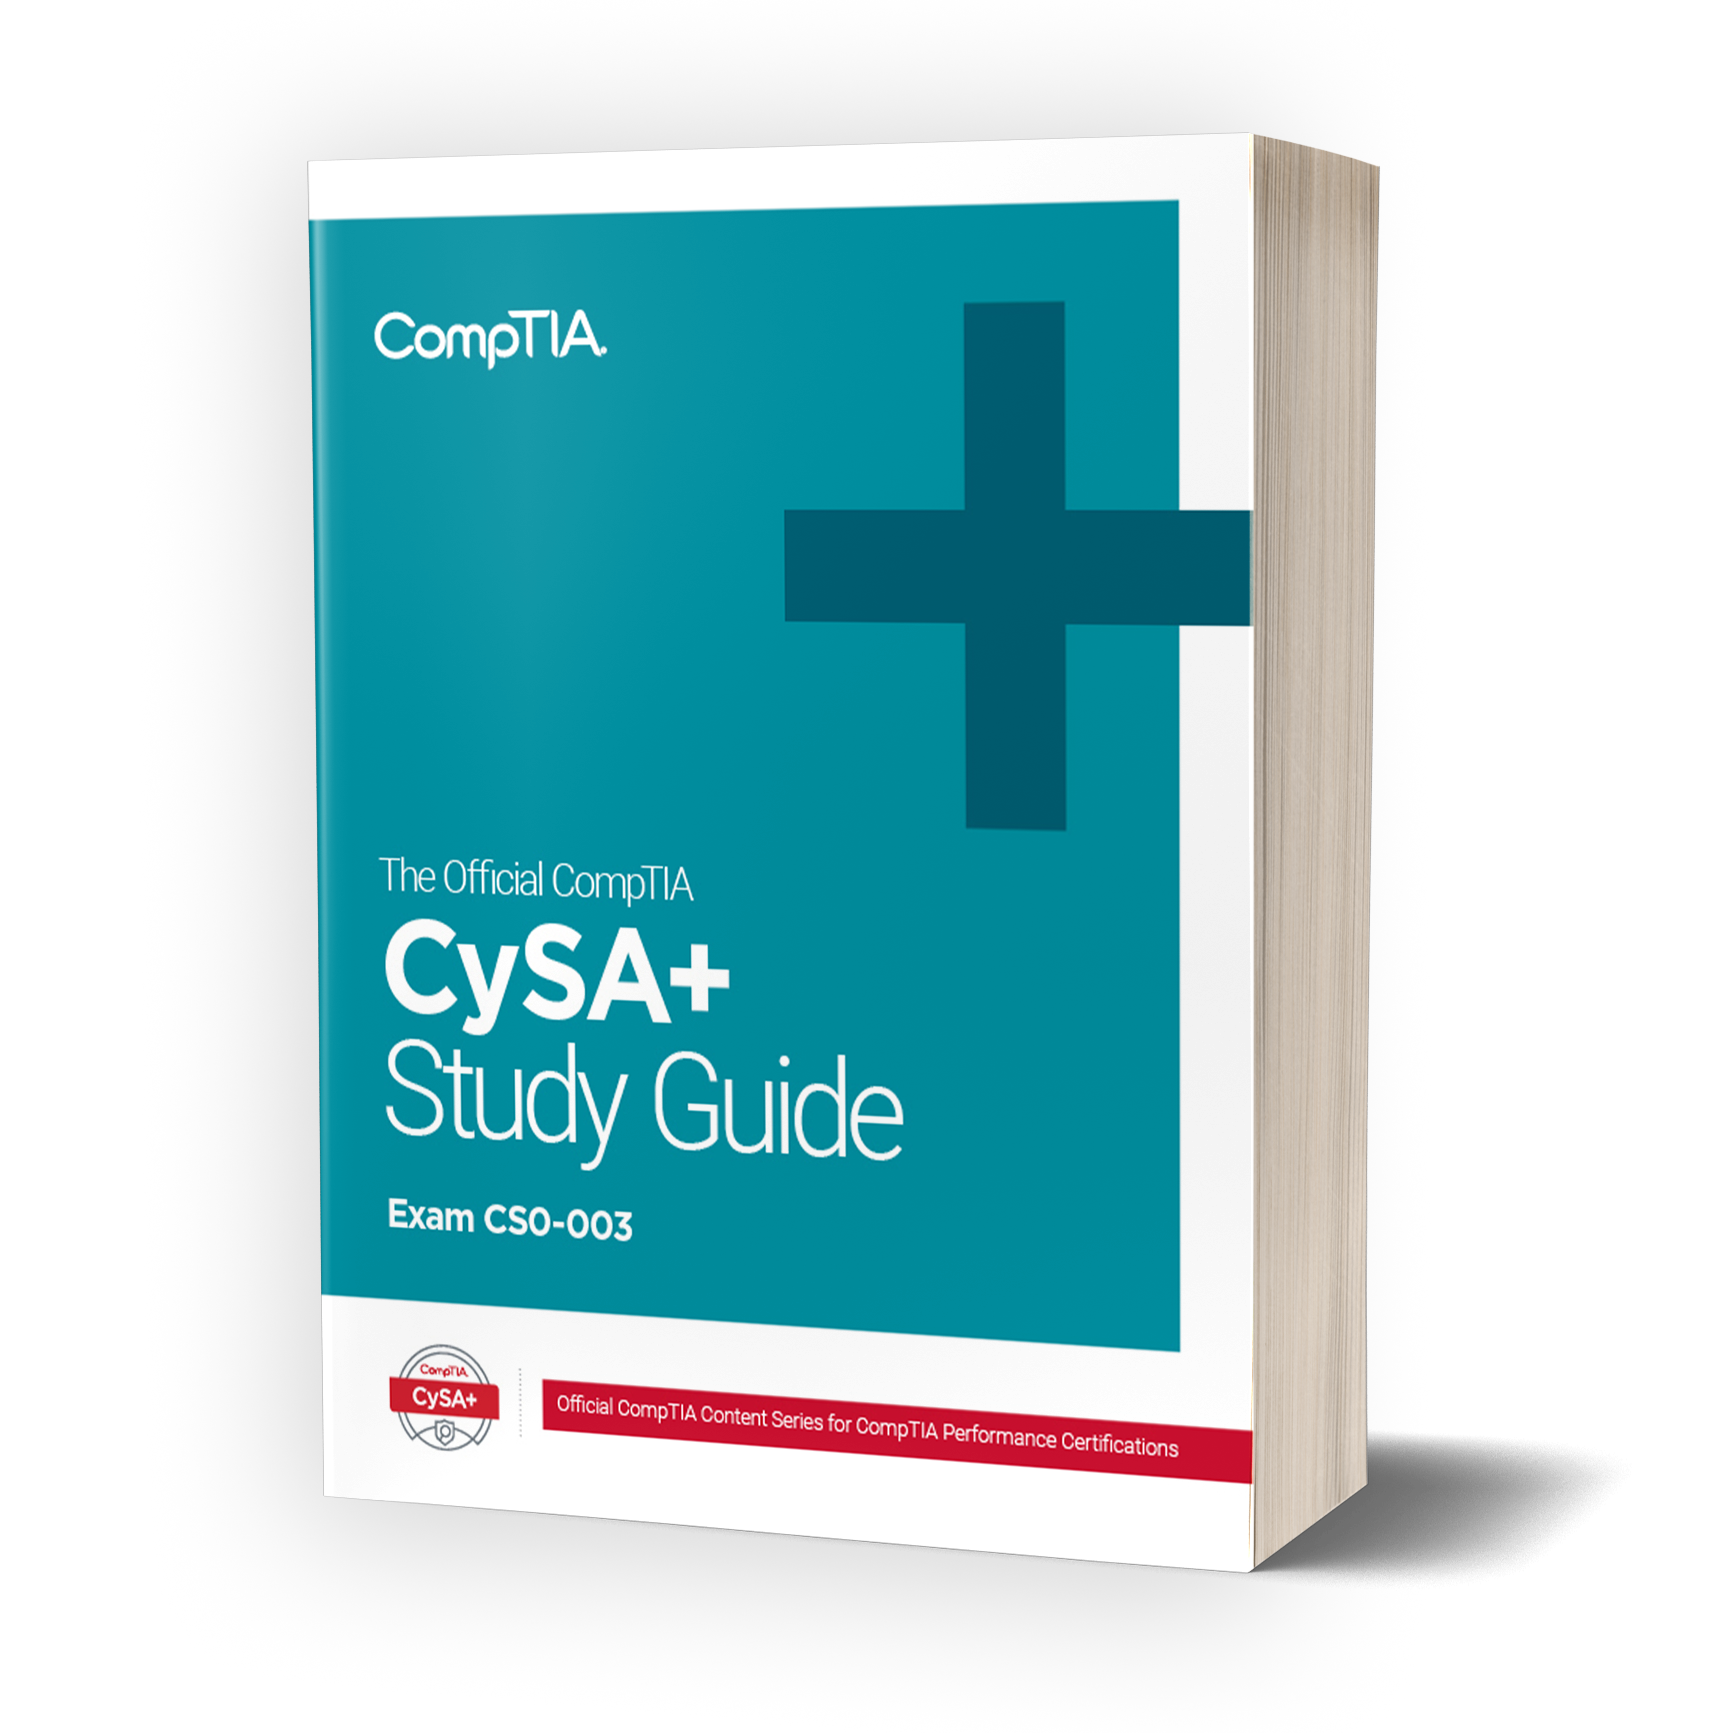 CompTIA CySA+ is the industry standard.